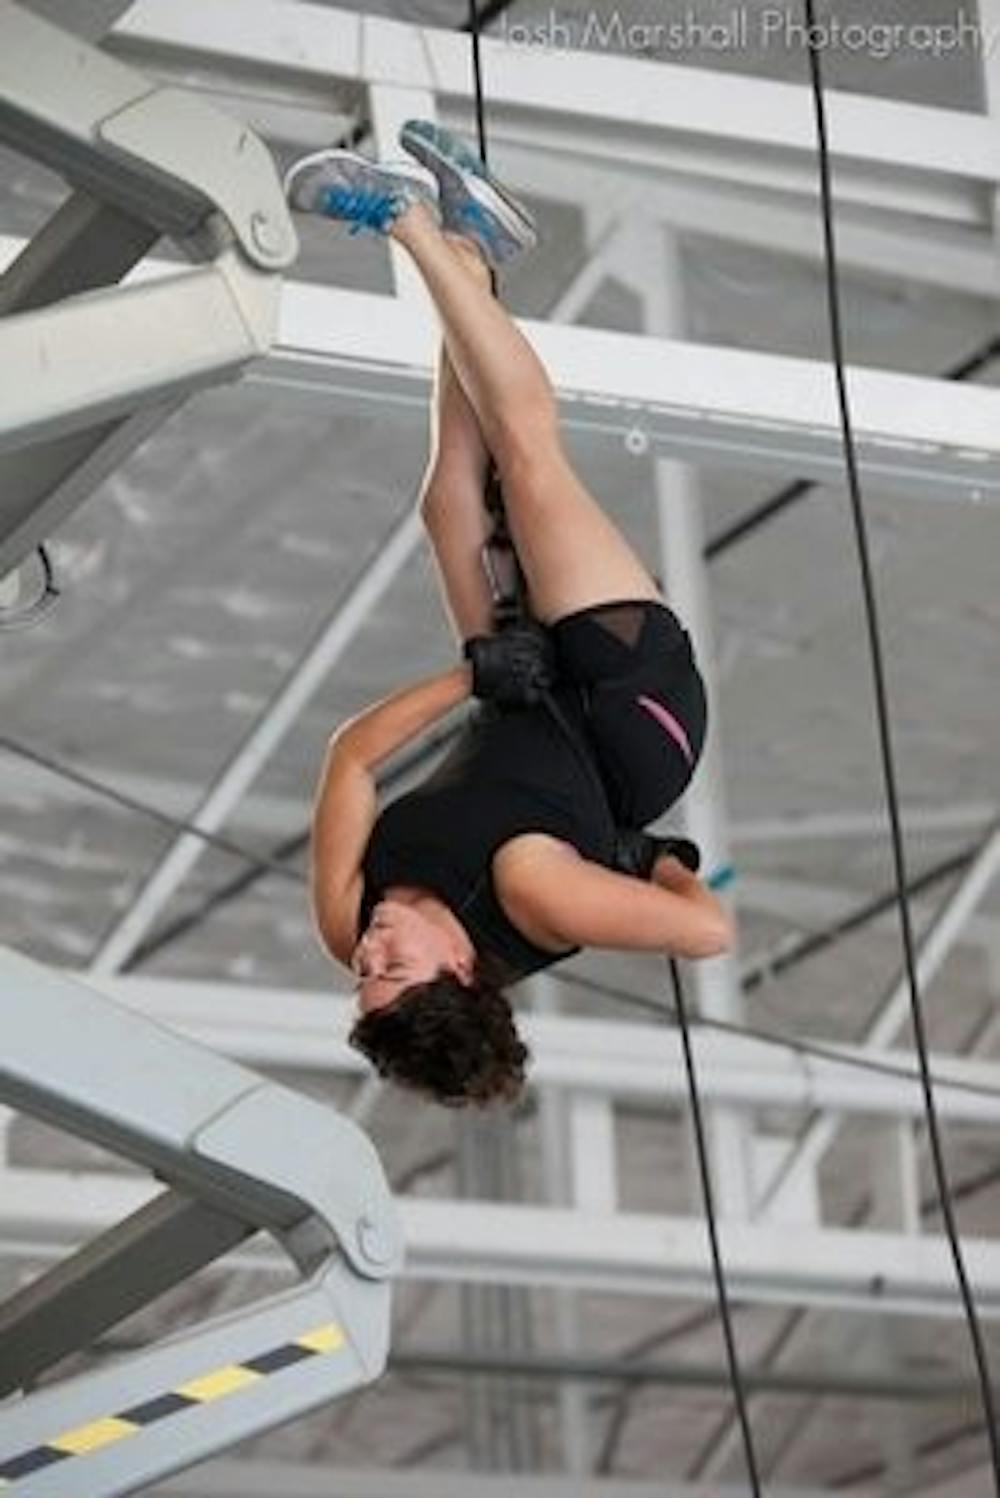 Grilli hangs in the air while performing a repelling stunt in Seattle last summer. (Photo contributed by Josh Marshall)